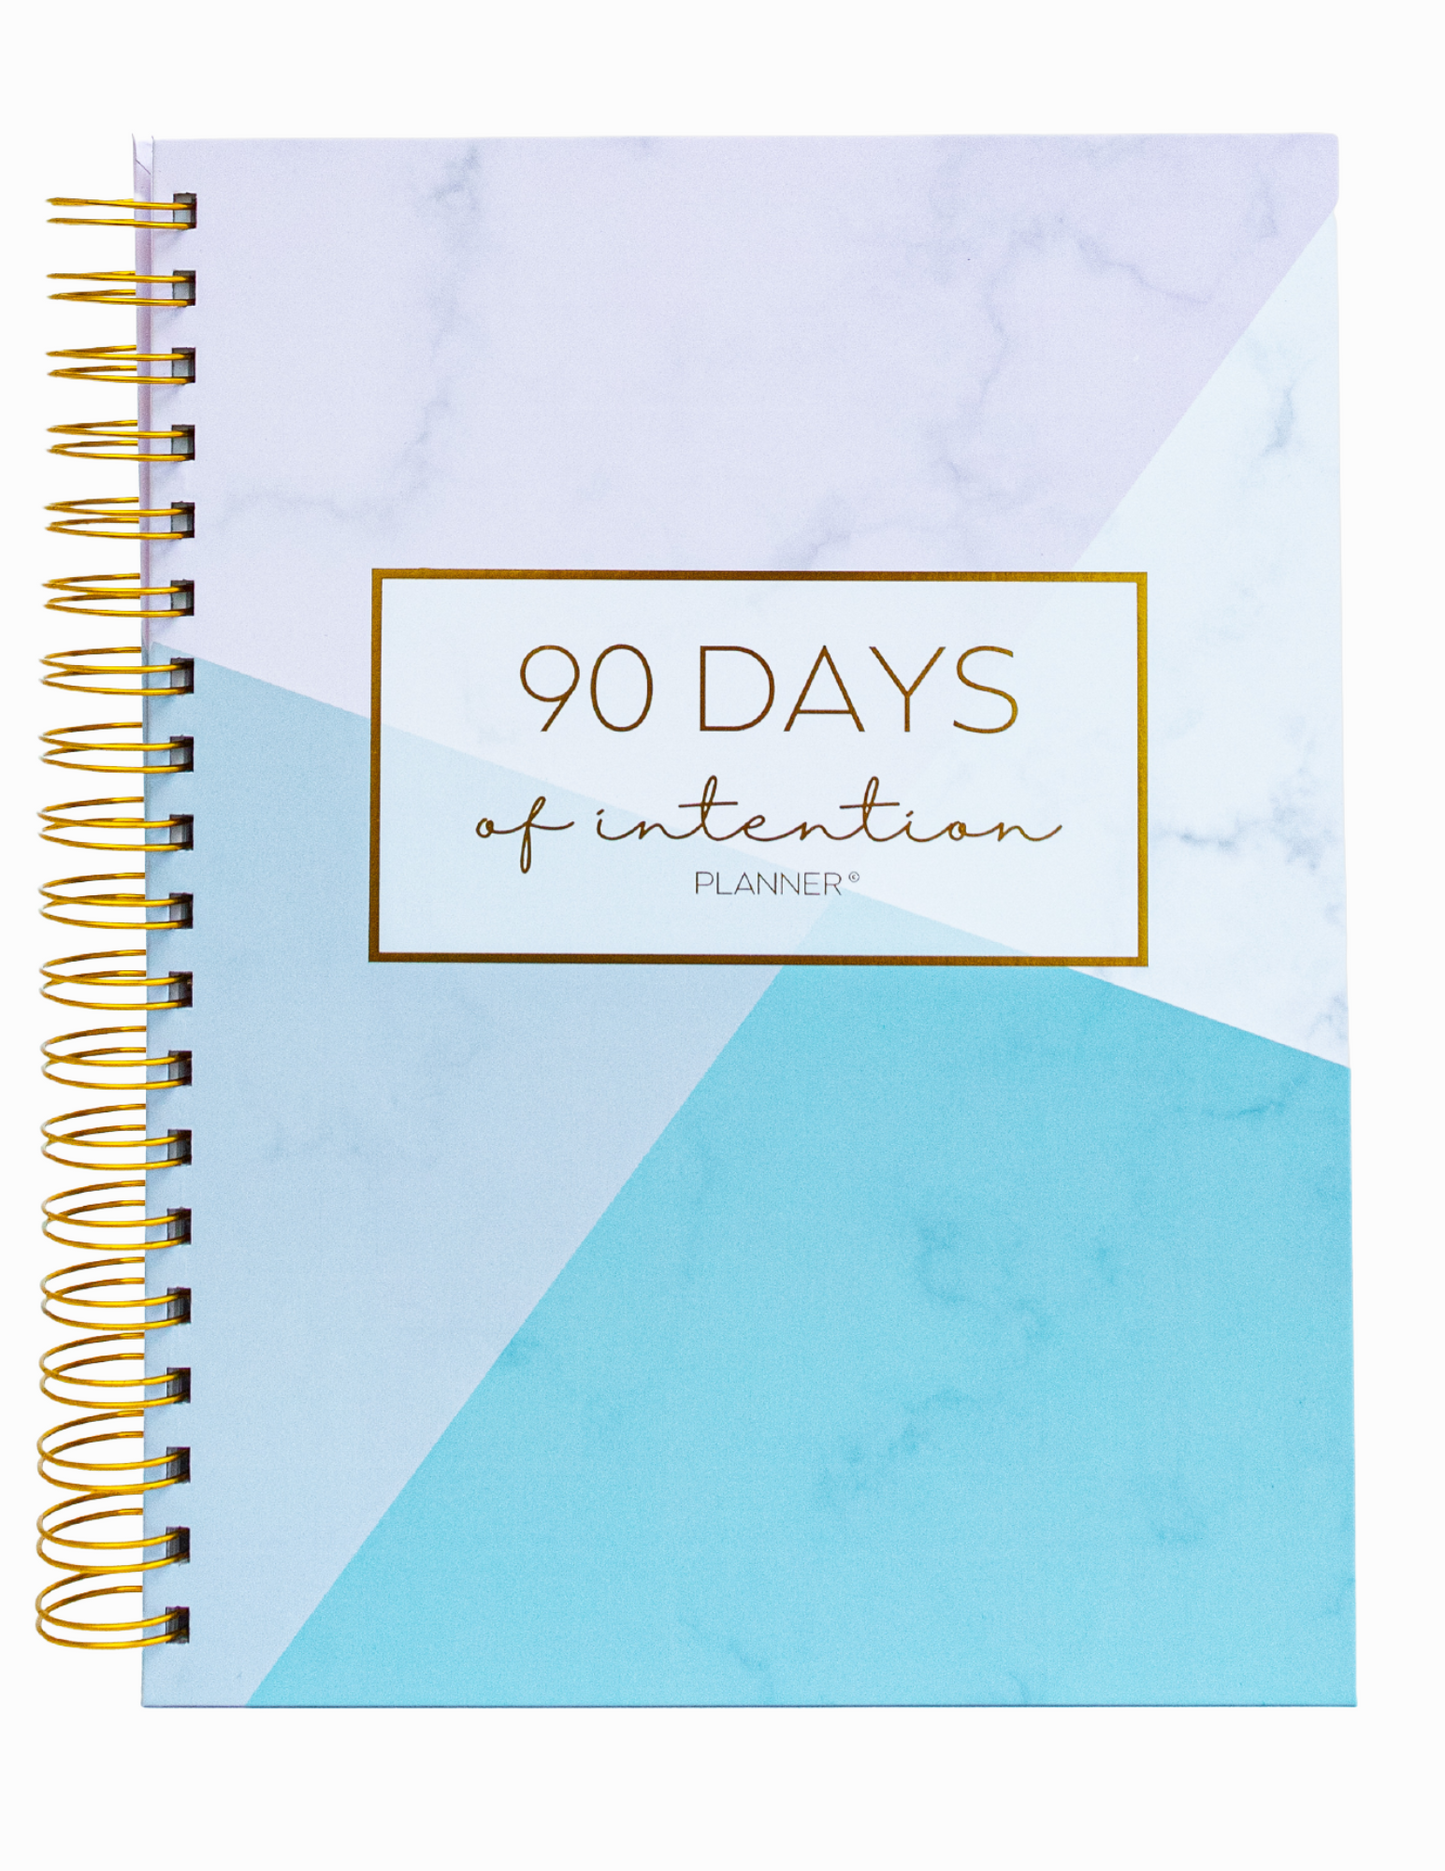 90 Days of Intention Planner